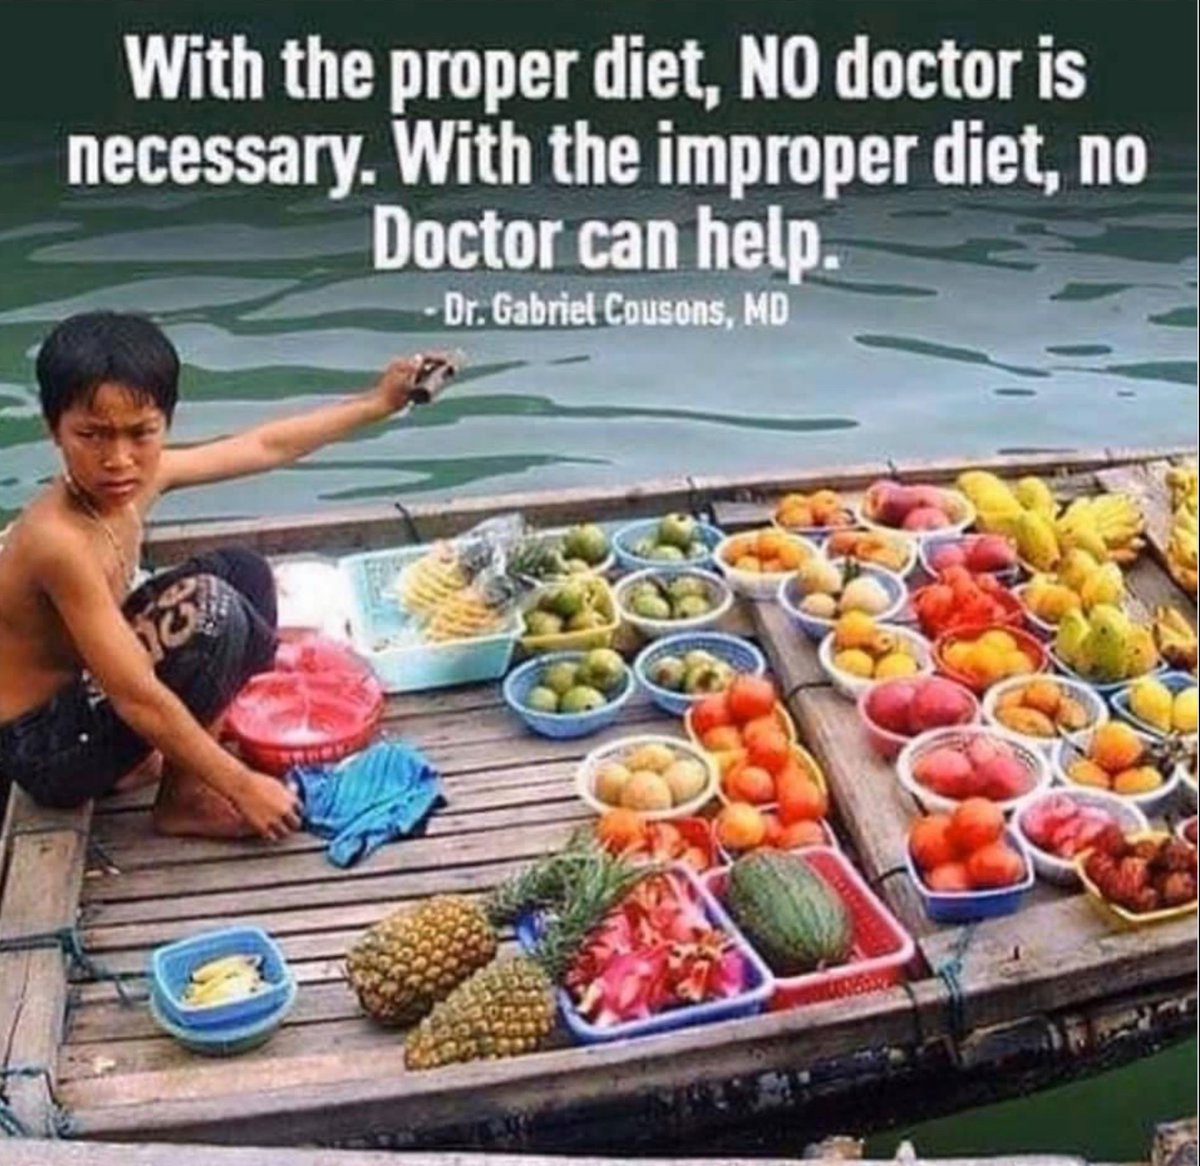 The proper diet is everything #eatyourveggies #cleanse #eatclean #fruit #farmtotable #vegetables #youarewhatyoueat #healthyeating #healthyliving #healthylifestyle #vegetables #fruit #nuts #plantbased #healthiswealth #healthiseverything